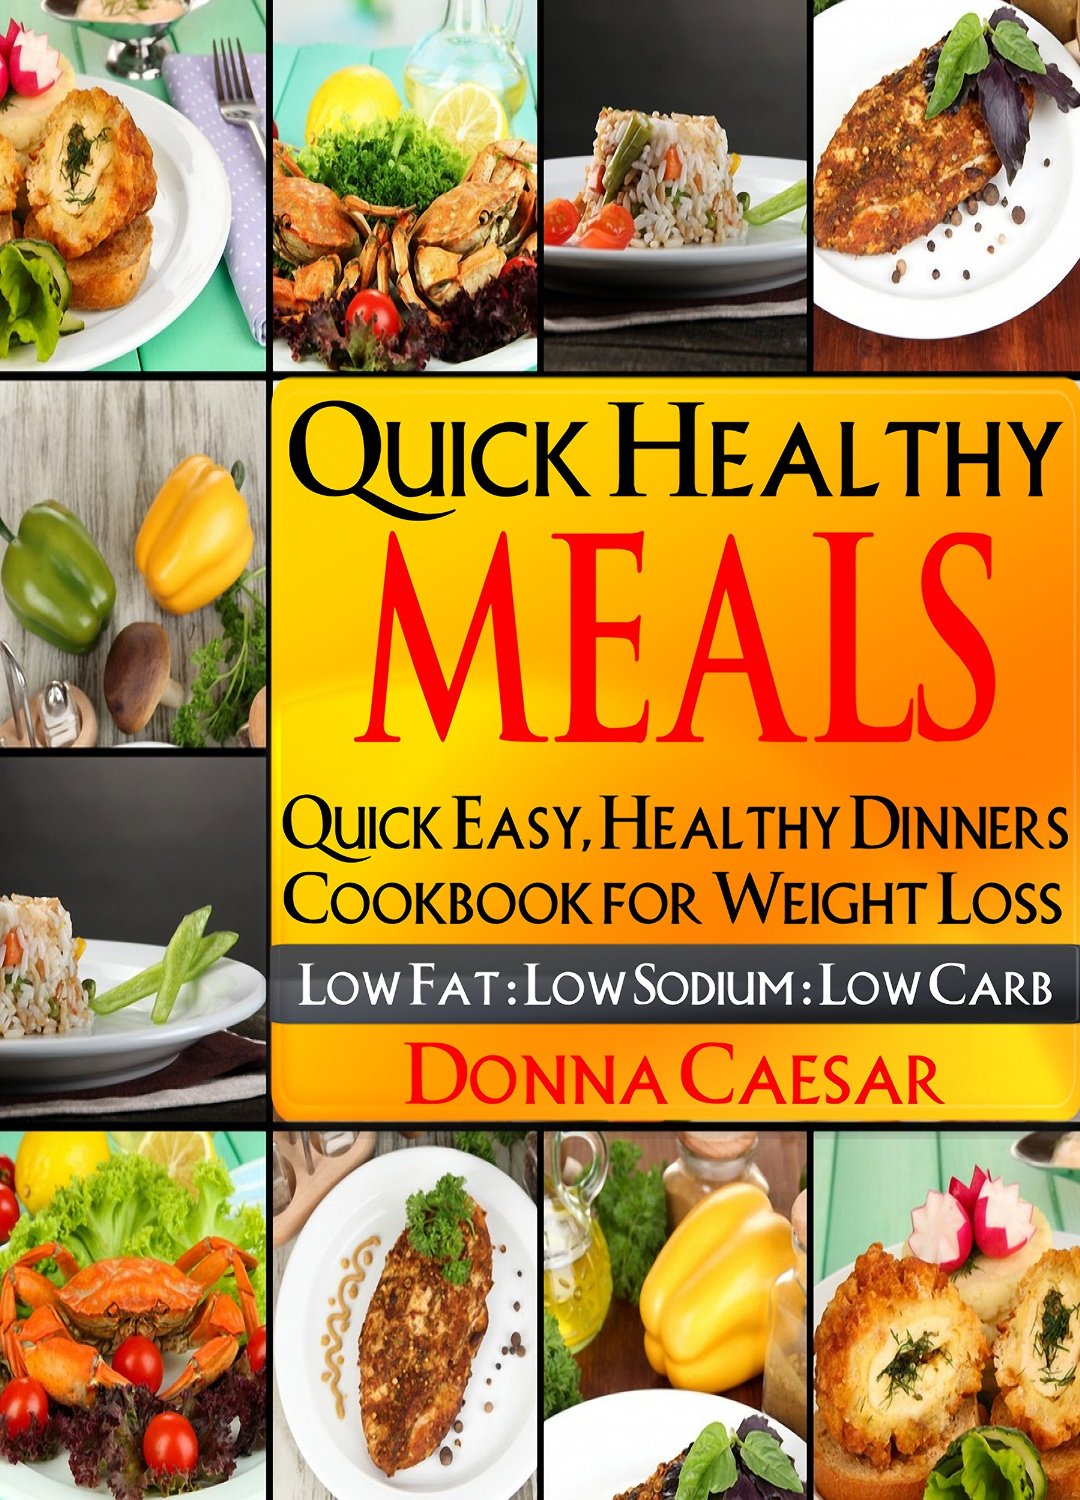 Quick Healthy Meals by Donna Szczur